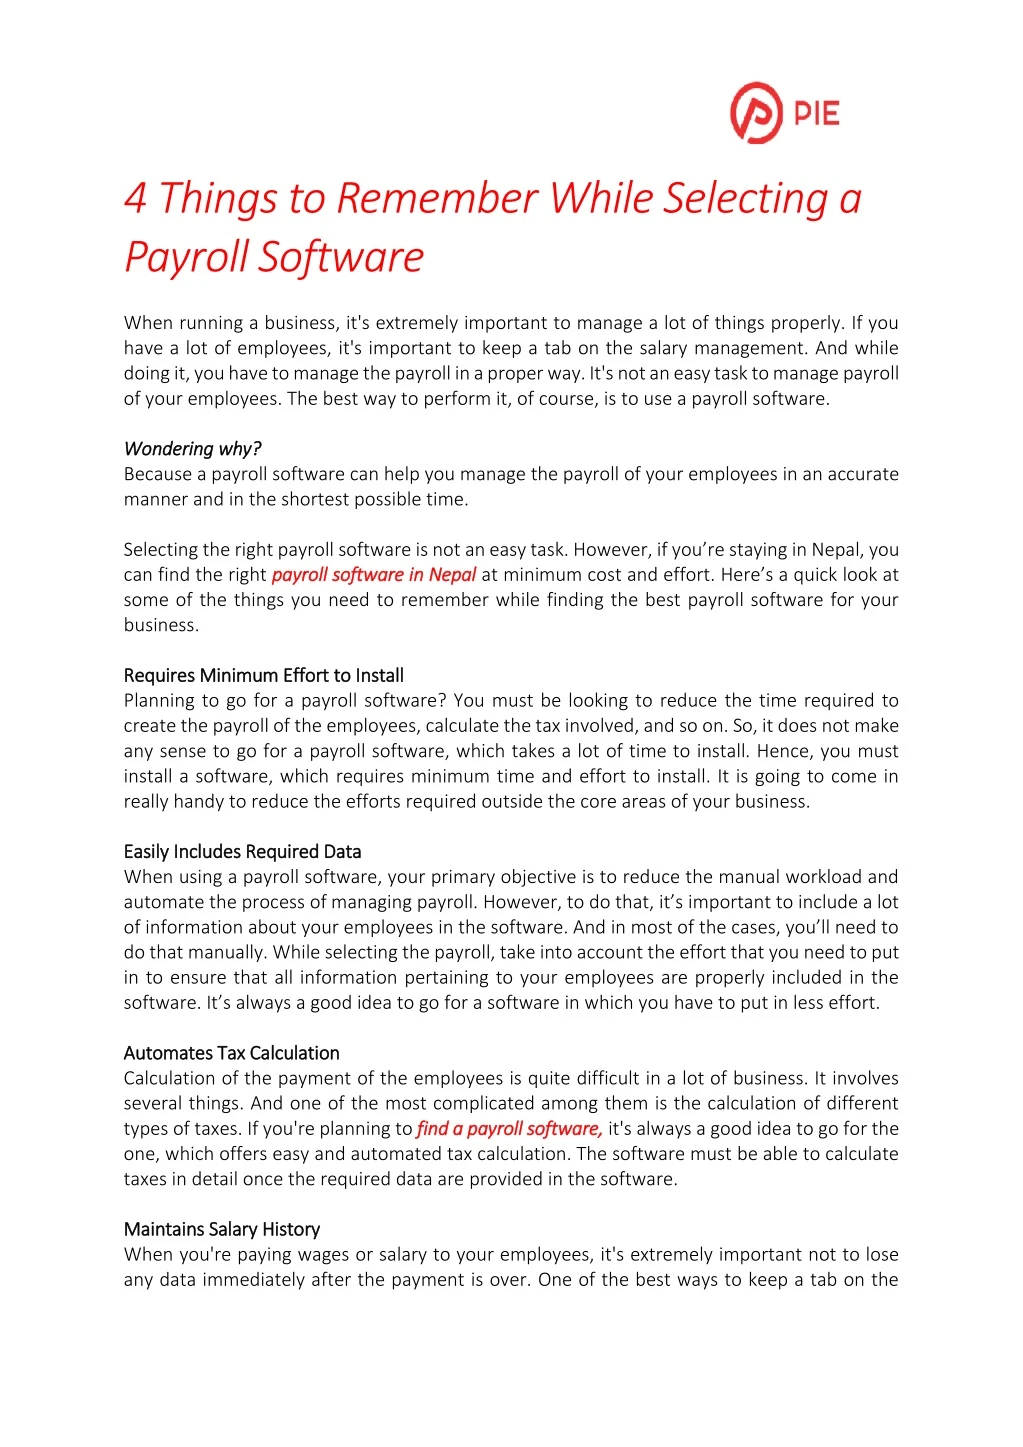 4 things to remember while selecting a payroll